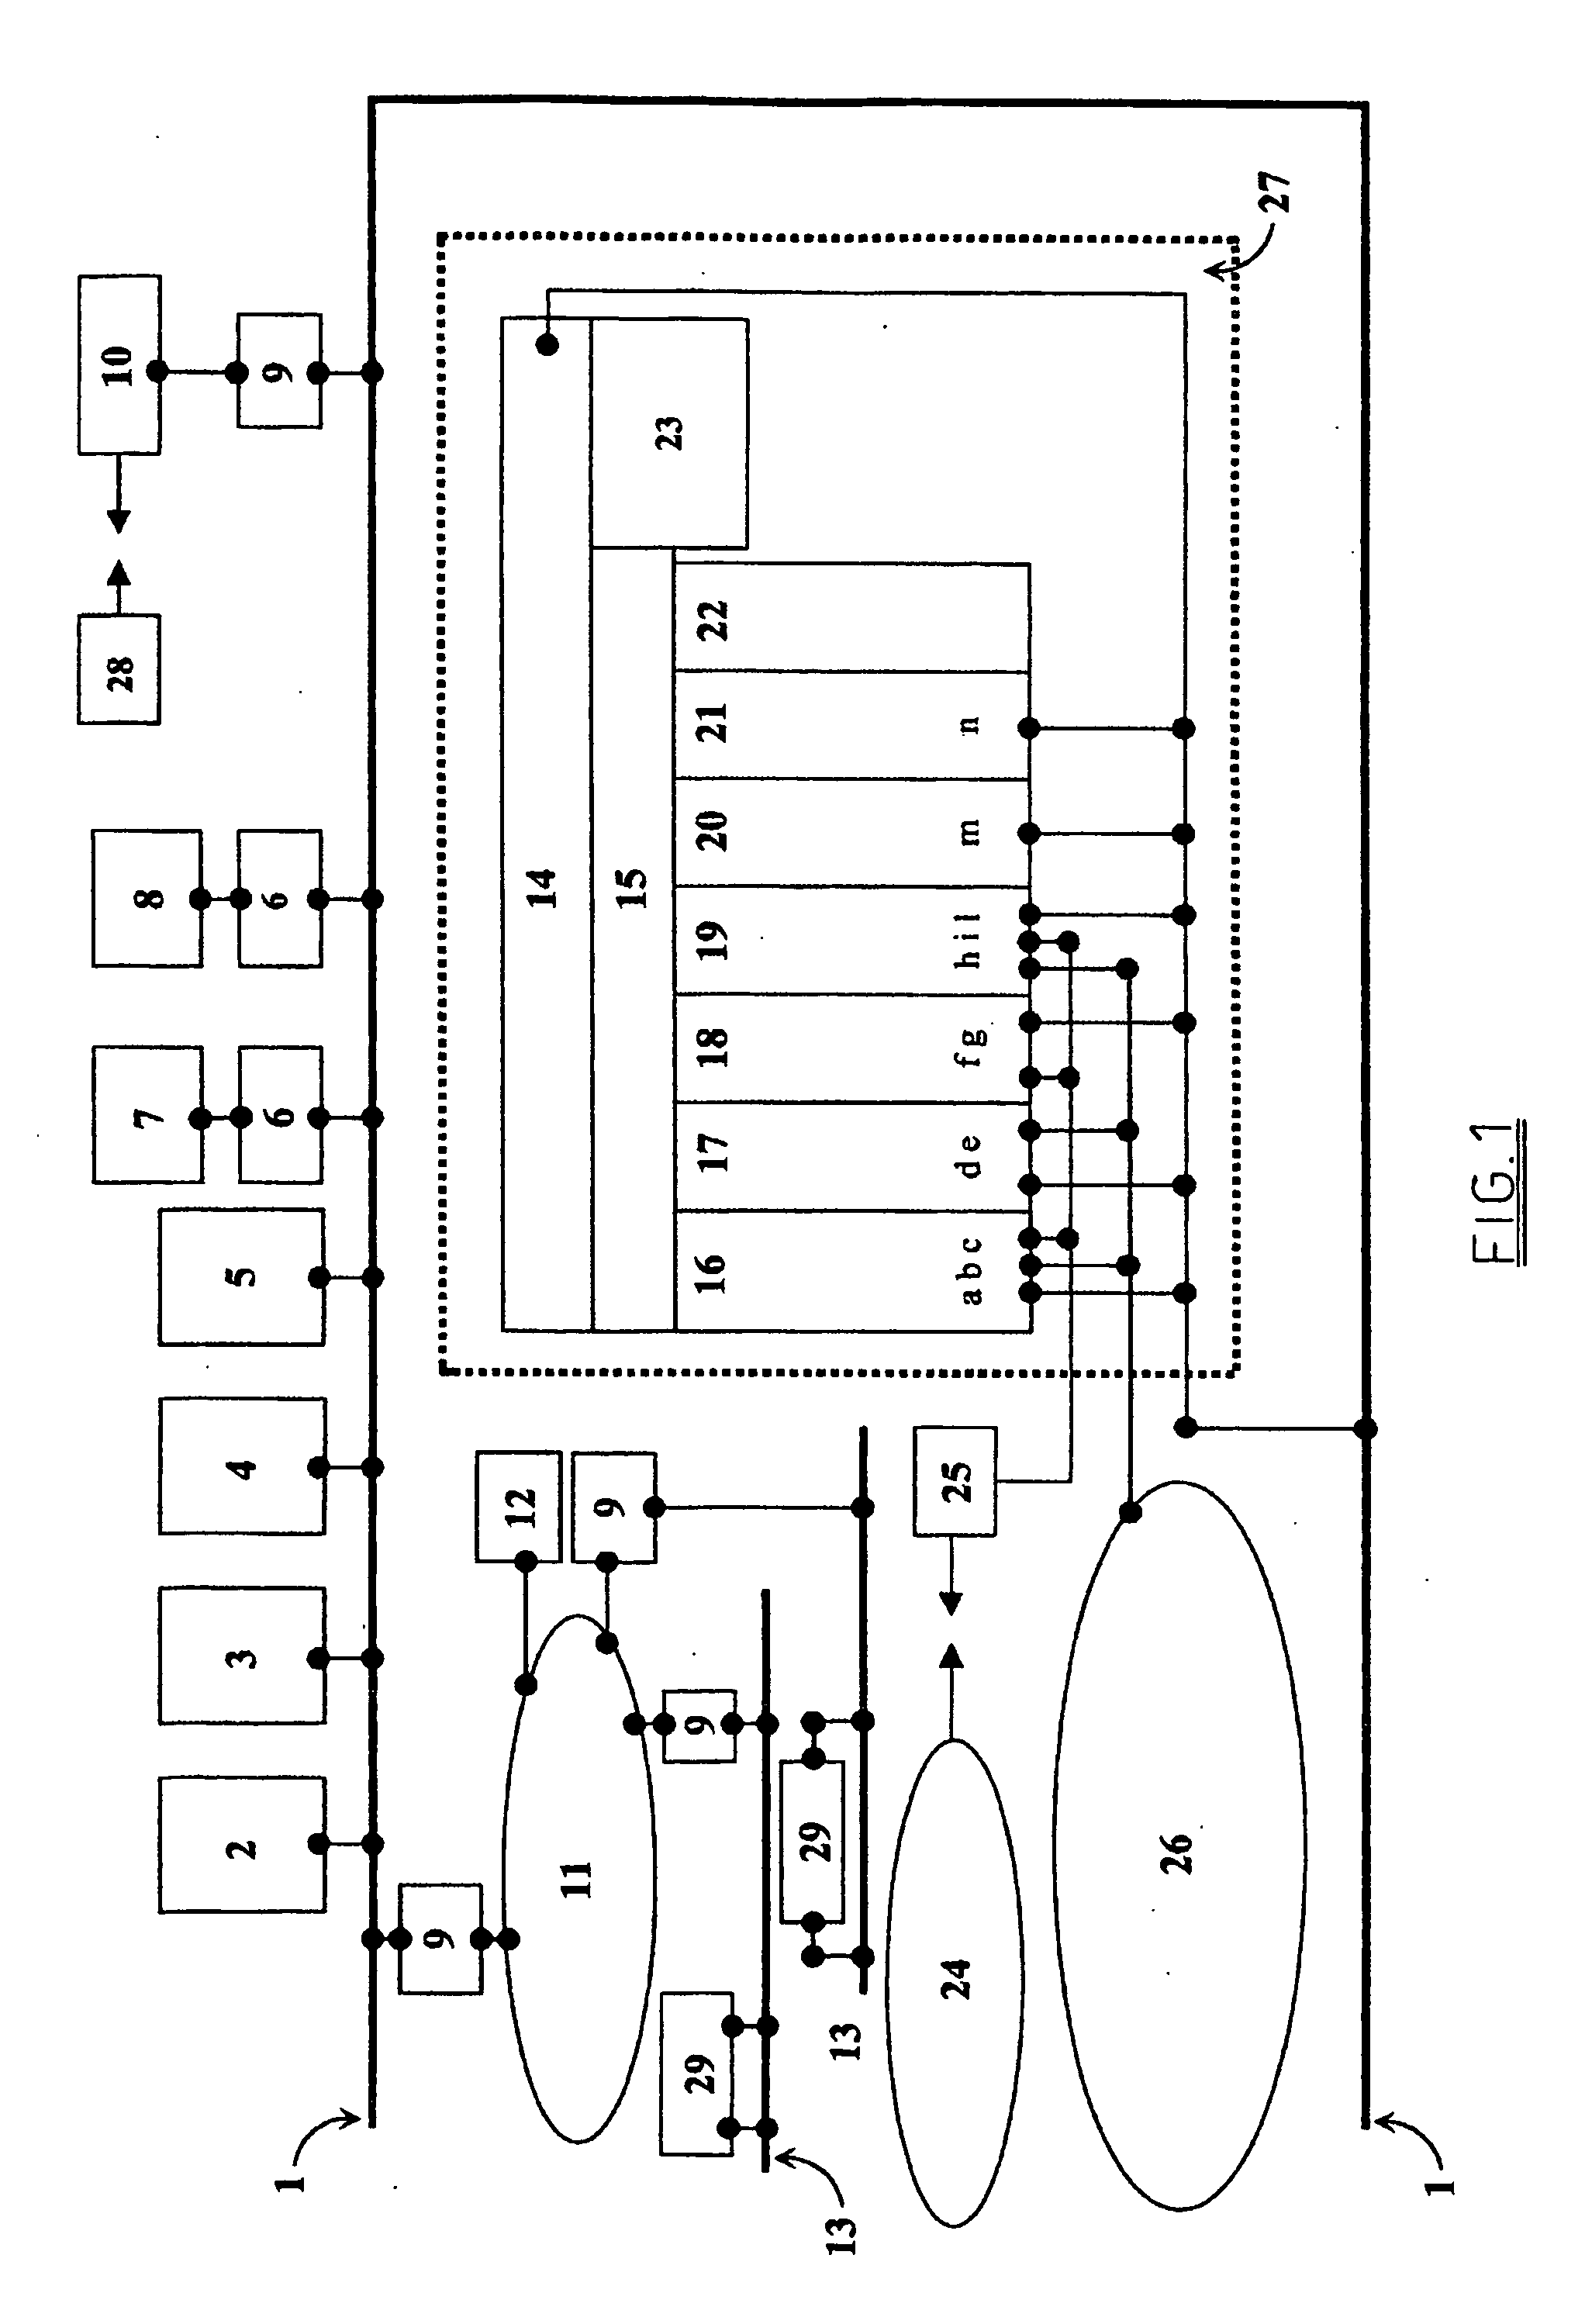 Method and Apparatus for Unified Management of Different Type of Communications Over Lan, Wan and Internet Networks, Using A Web Browser